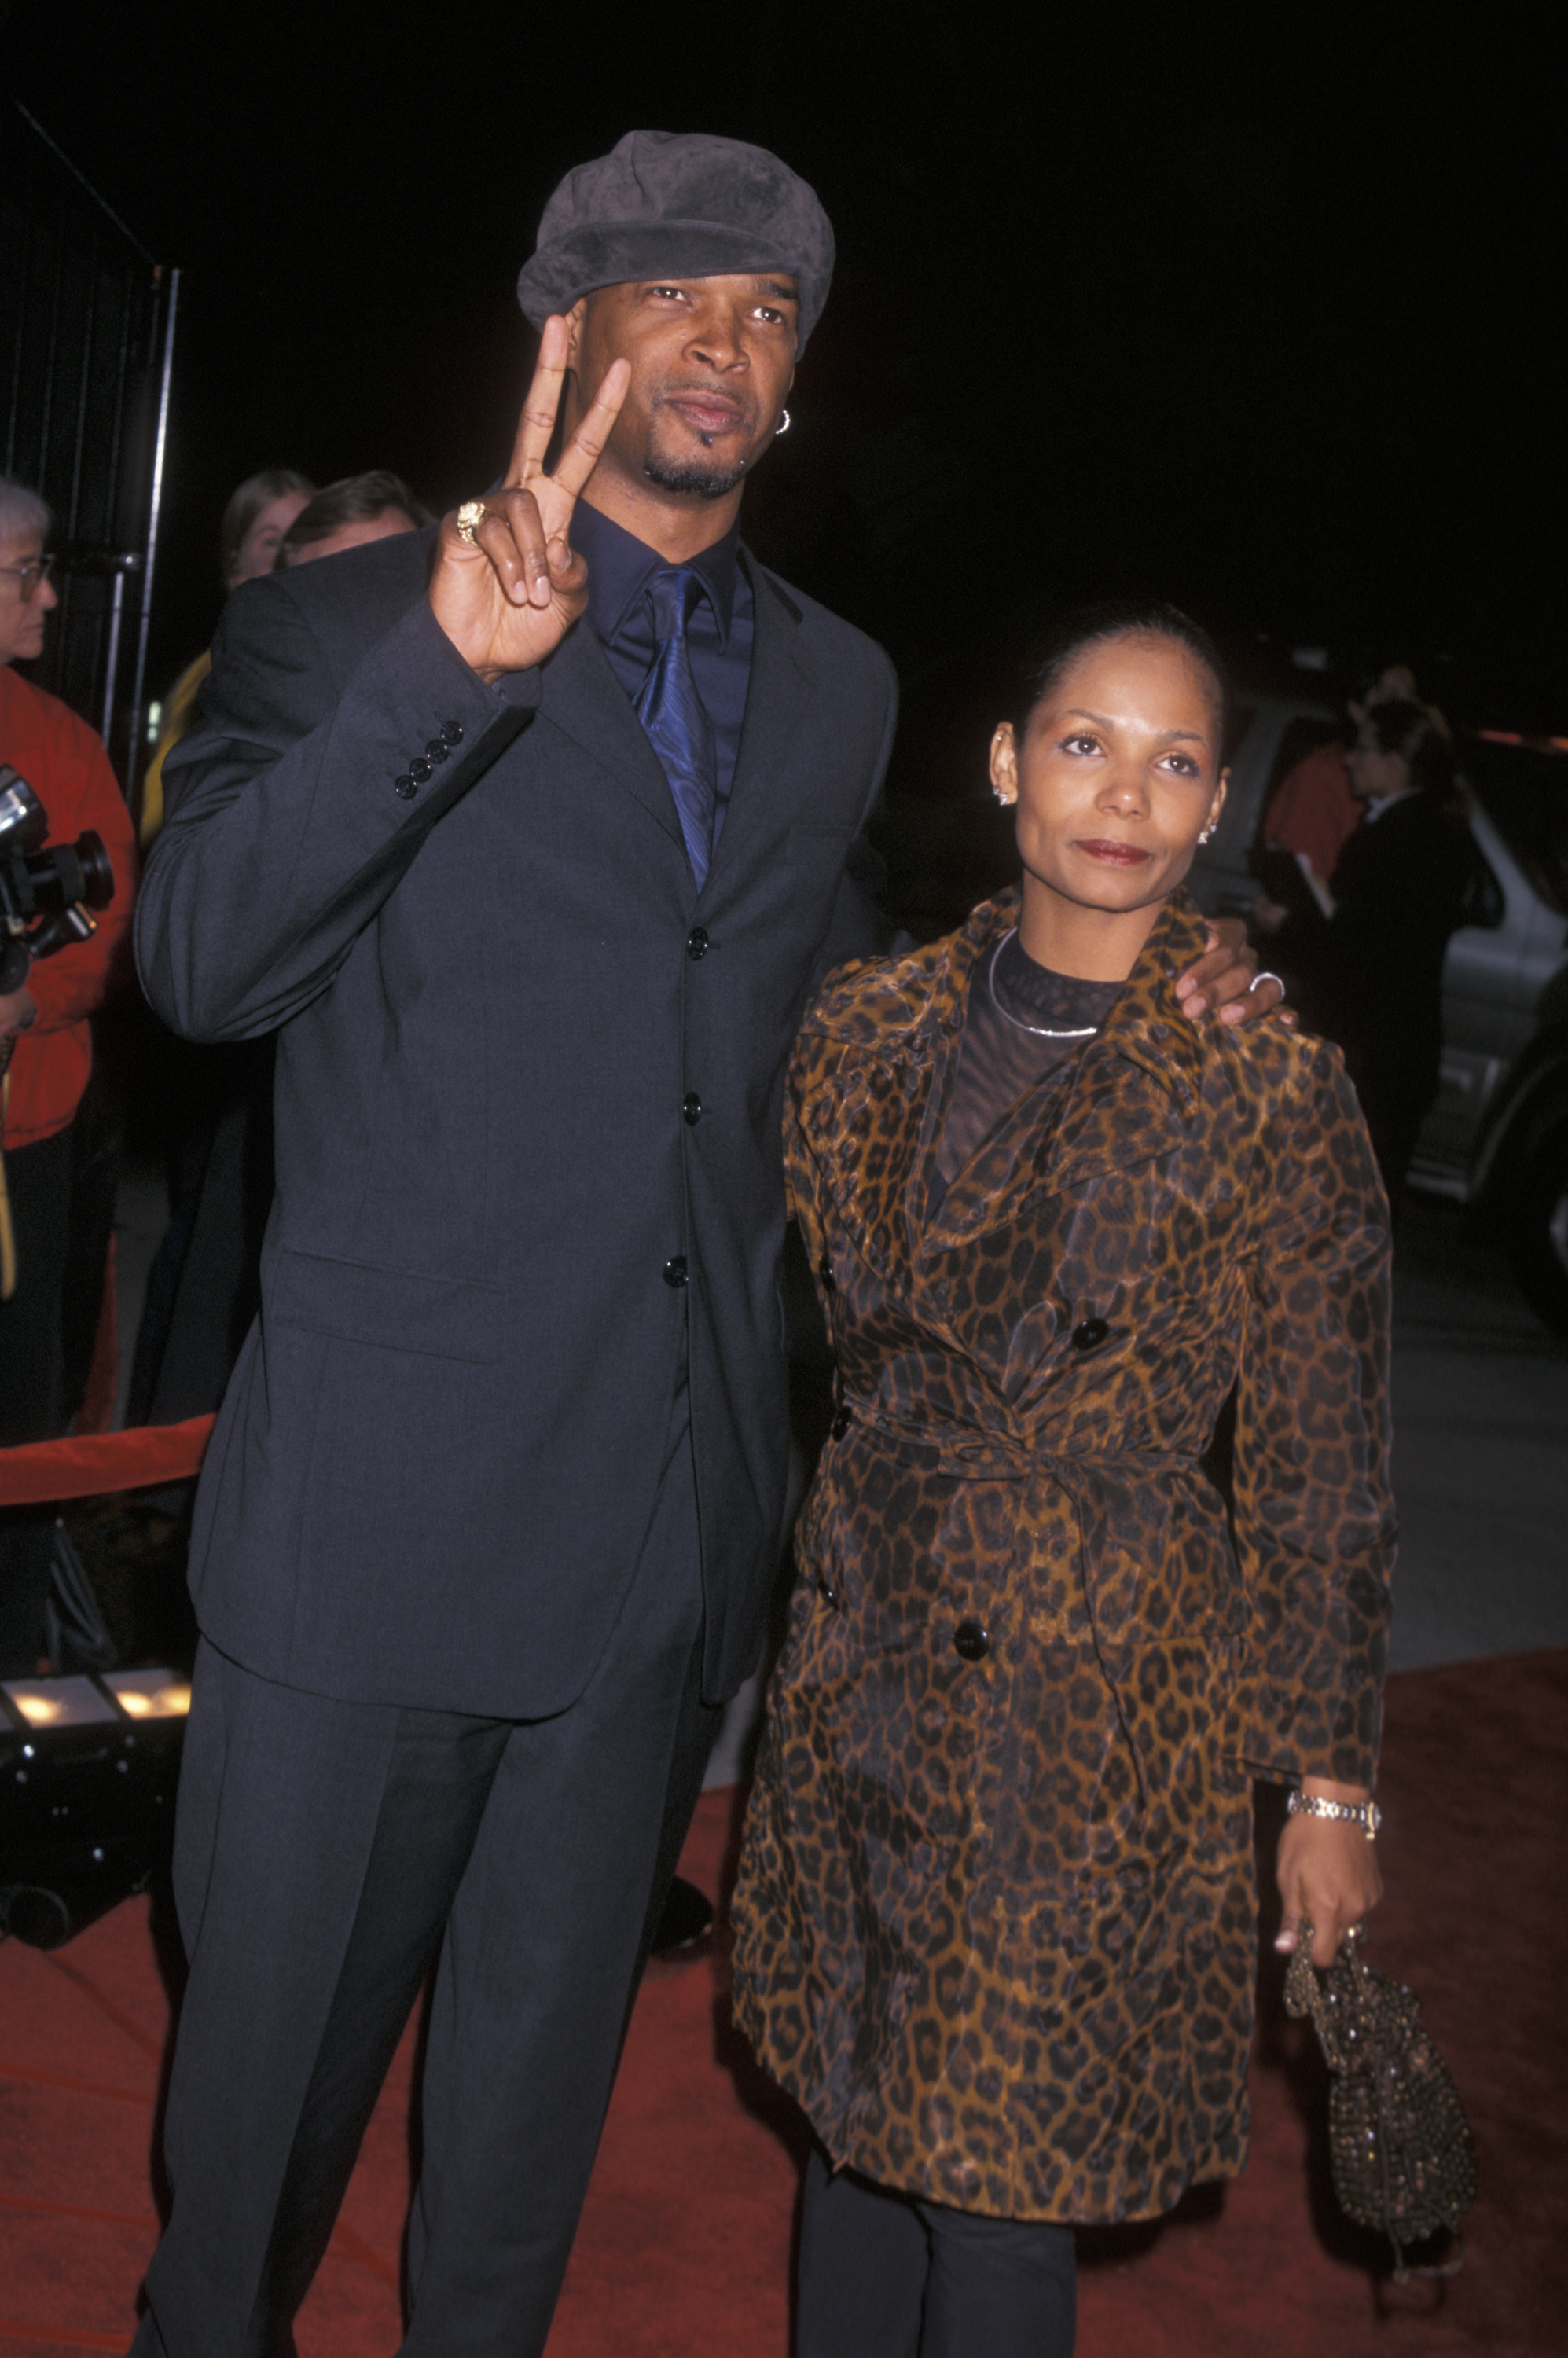 Actor Damon Wayans and wife Lisa Thorner on February 22, 1998 at the Shrine Auditorium in Los Angeles, California. | Source: Getty Images